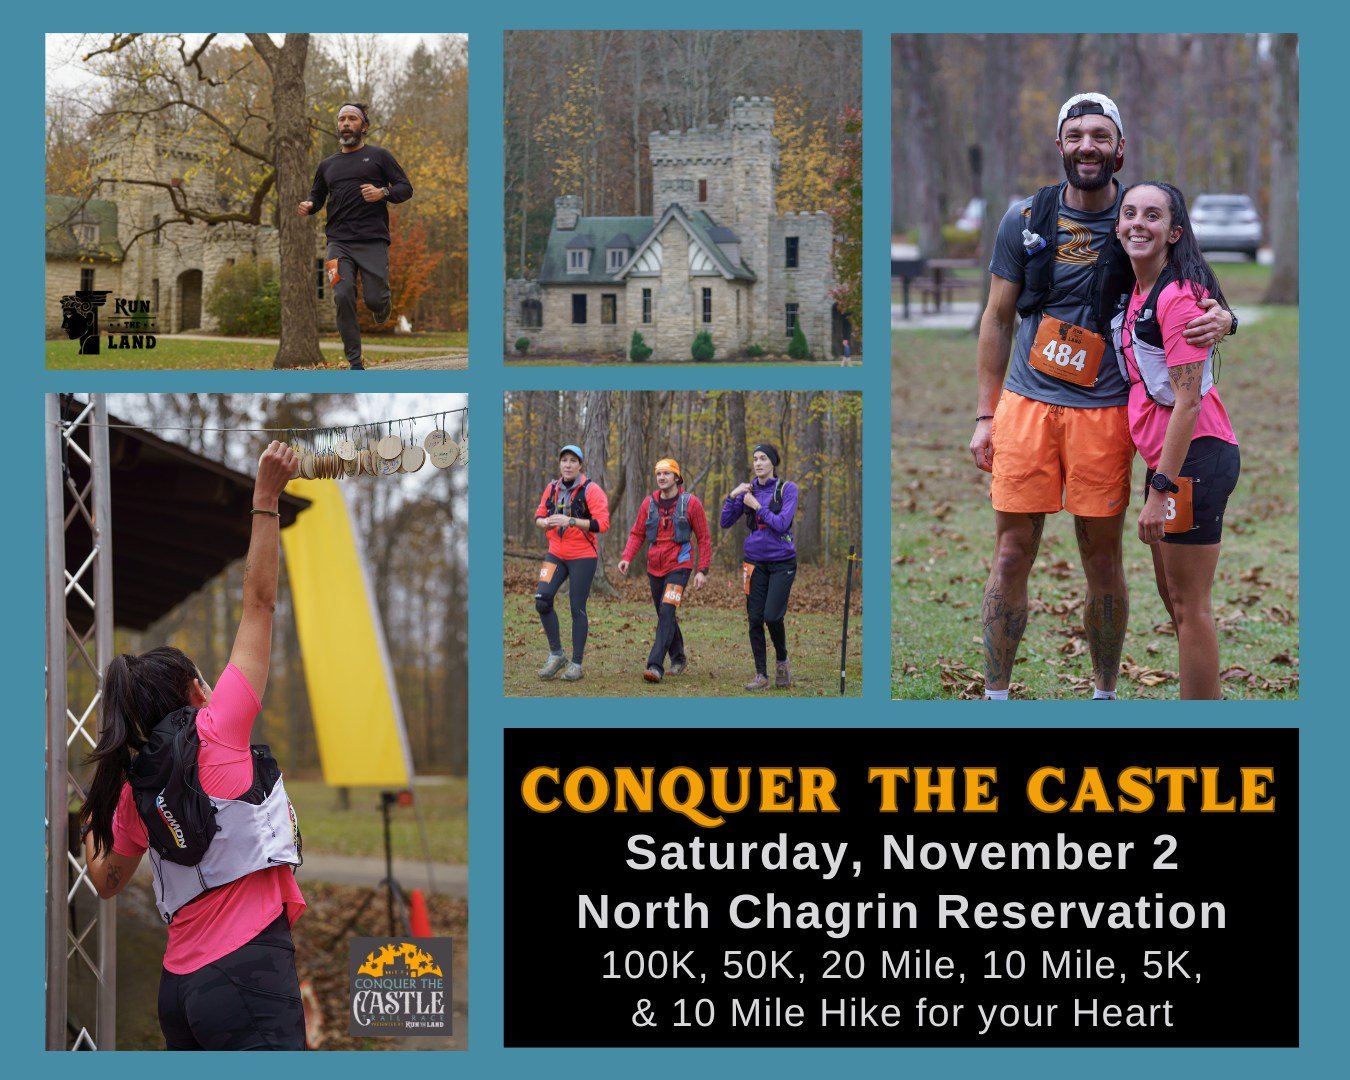 What are your trail racing goals for this fall? Add Conquer the Castle! 

With several racing options, there is something for all levels &amp; abilities!

Enjoy the scenic fall foliage as you traverse through a dense maze of giant trees to conquer th